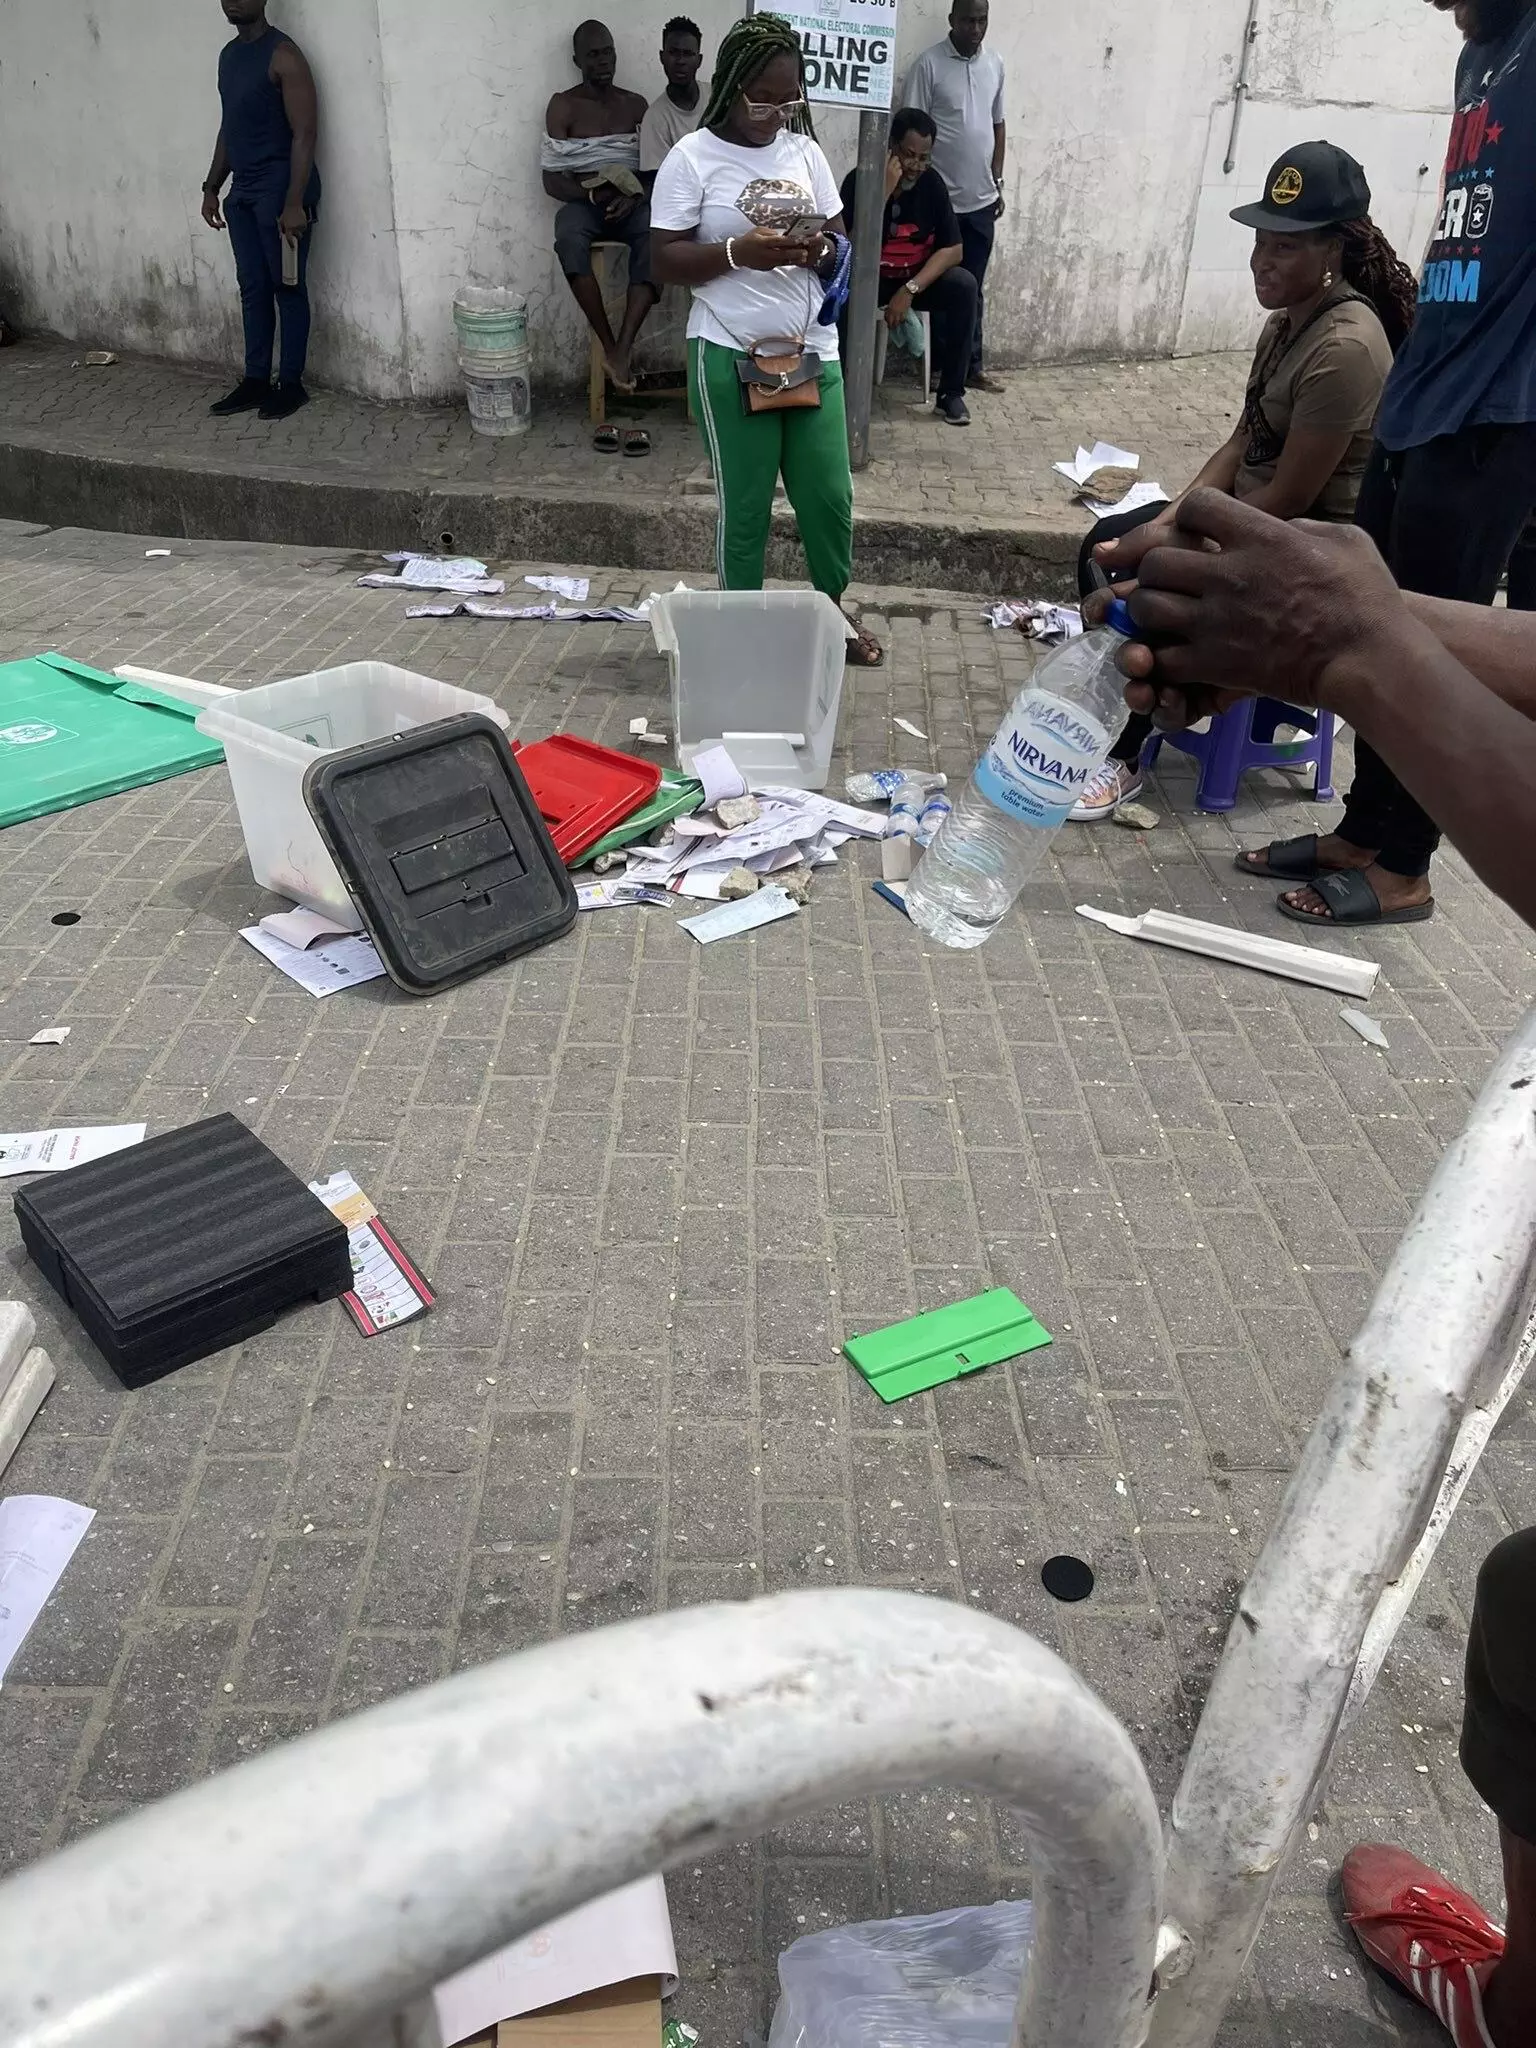 Voters in Lagos flee as thugs smash ballots